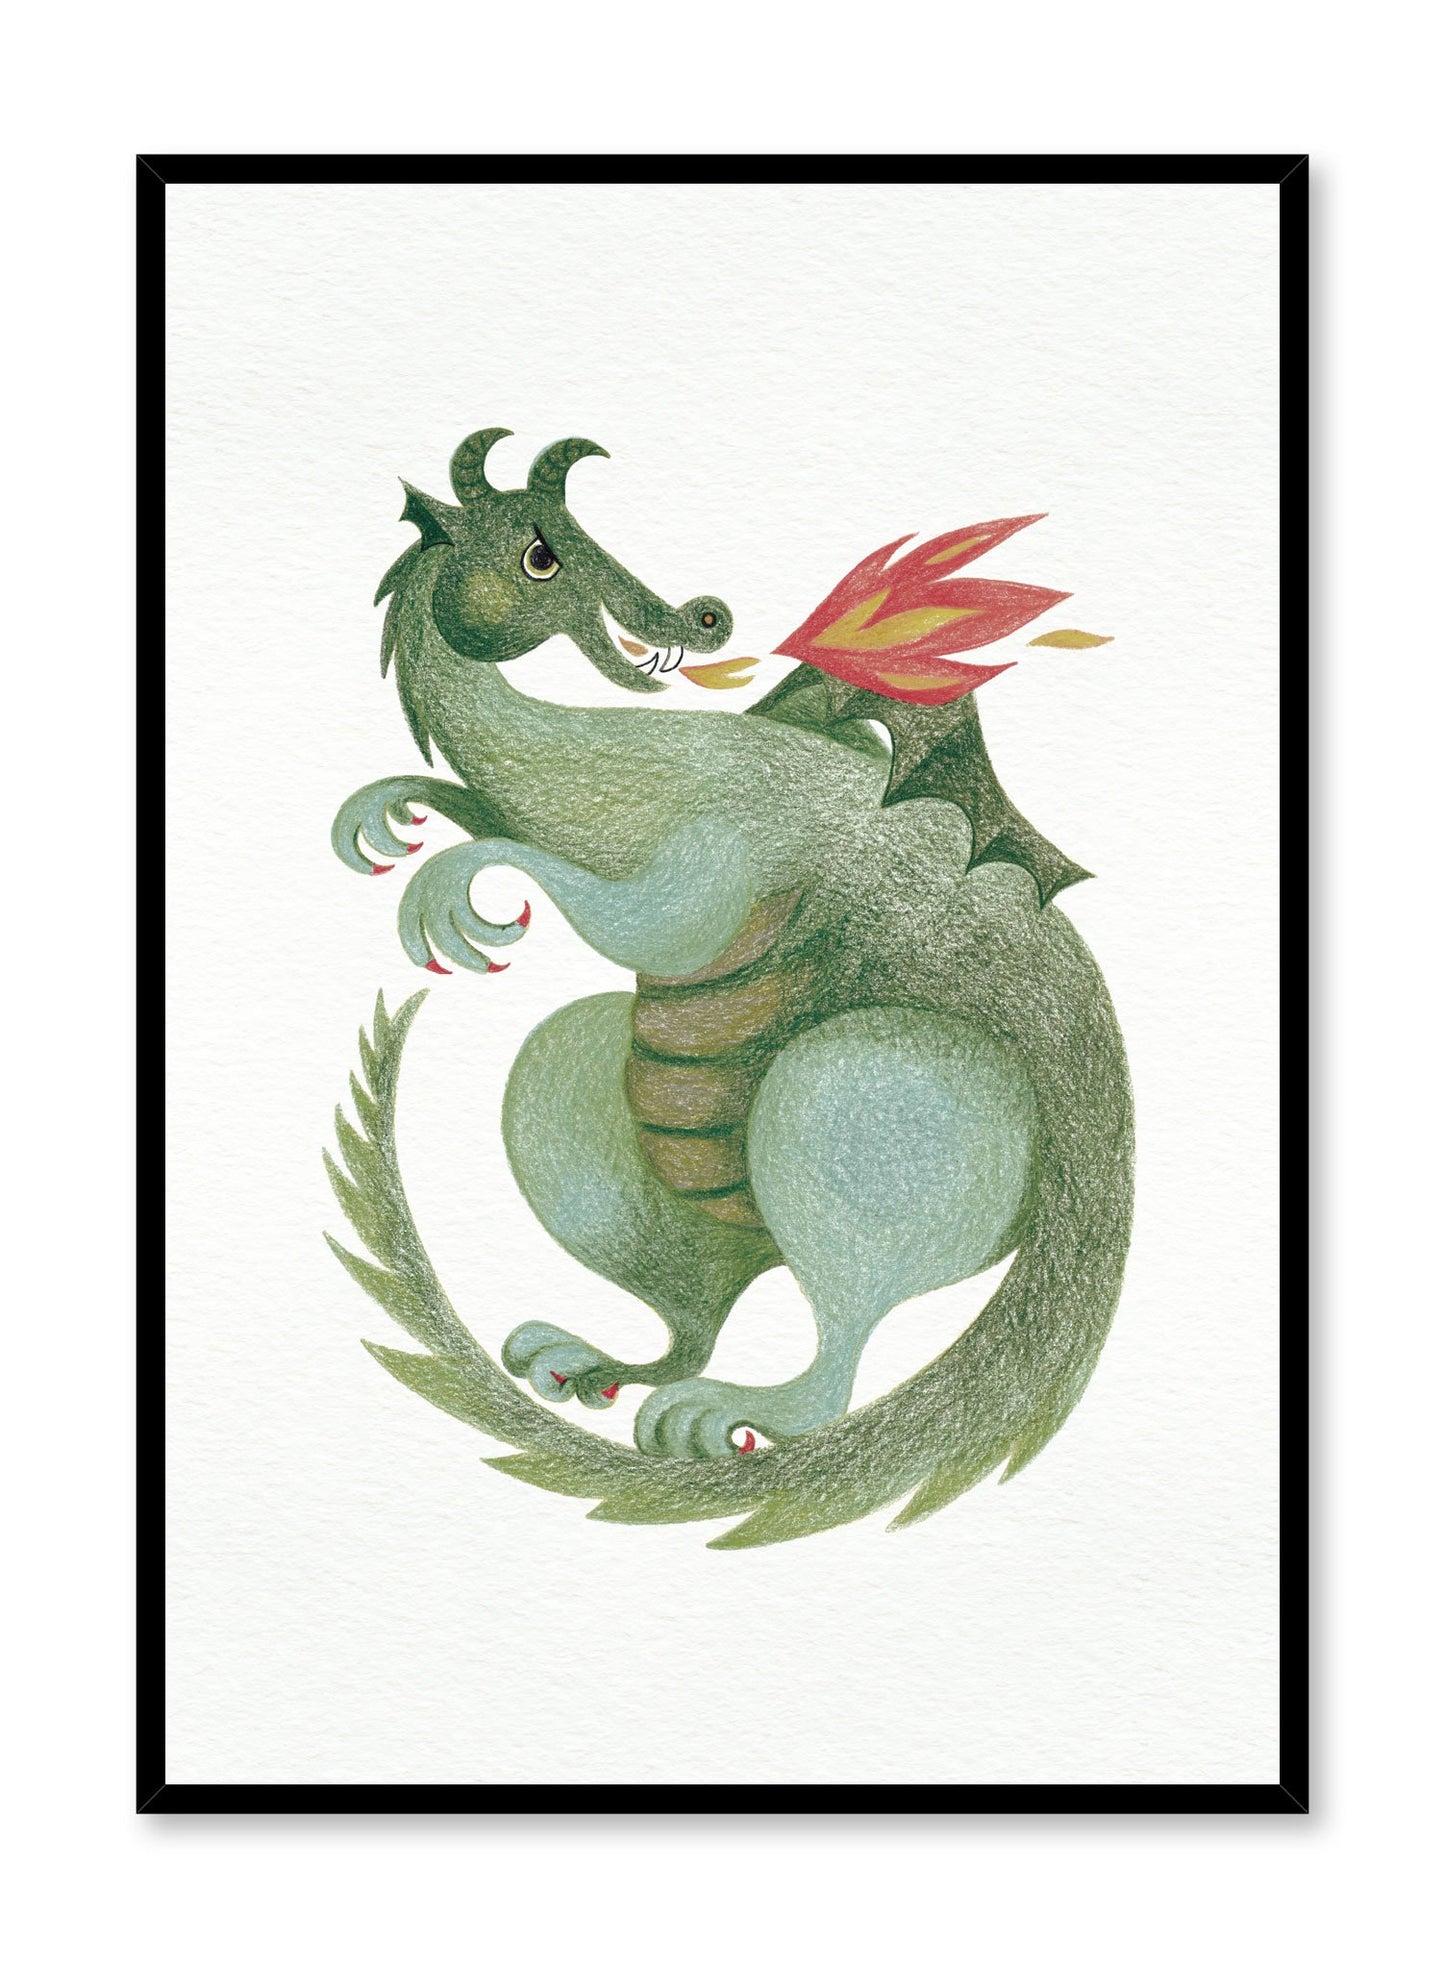 Dragon's Breath is a minimalist illustration by Opposite Wall of of a fierce dragon breathing out fire.